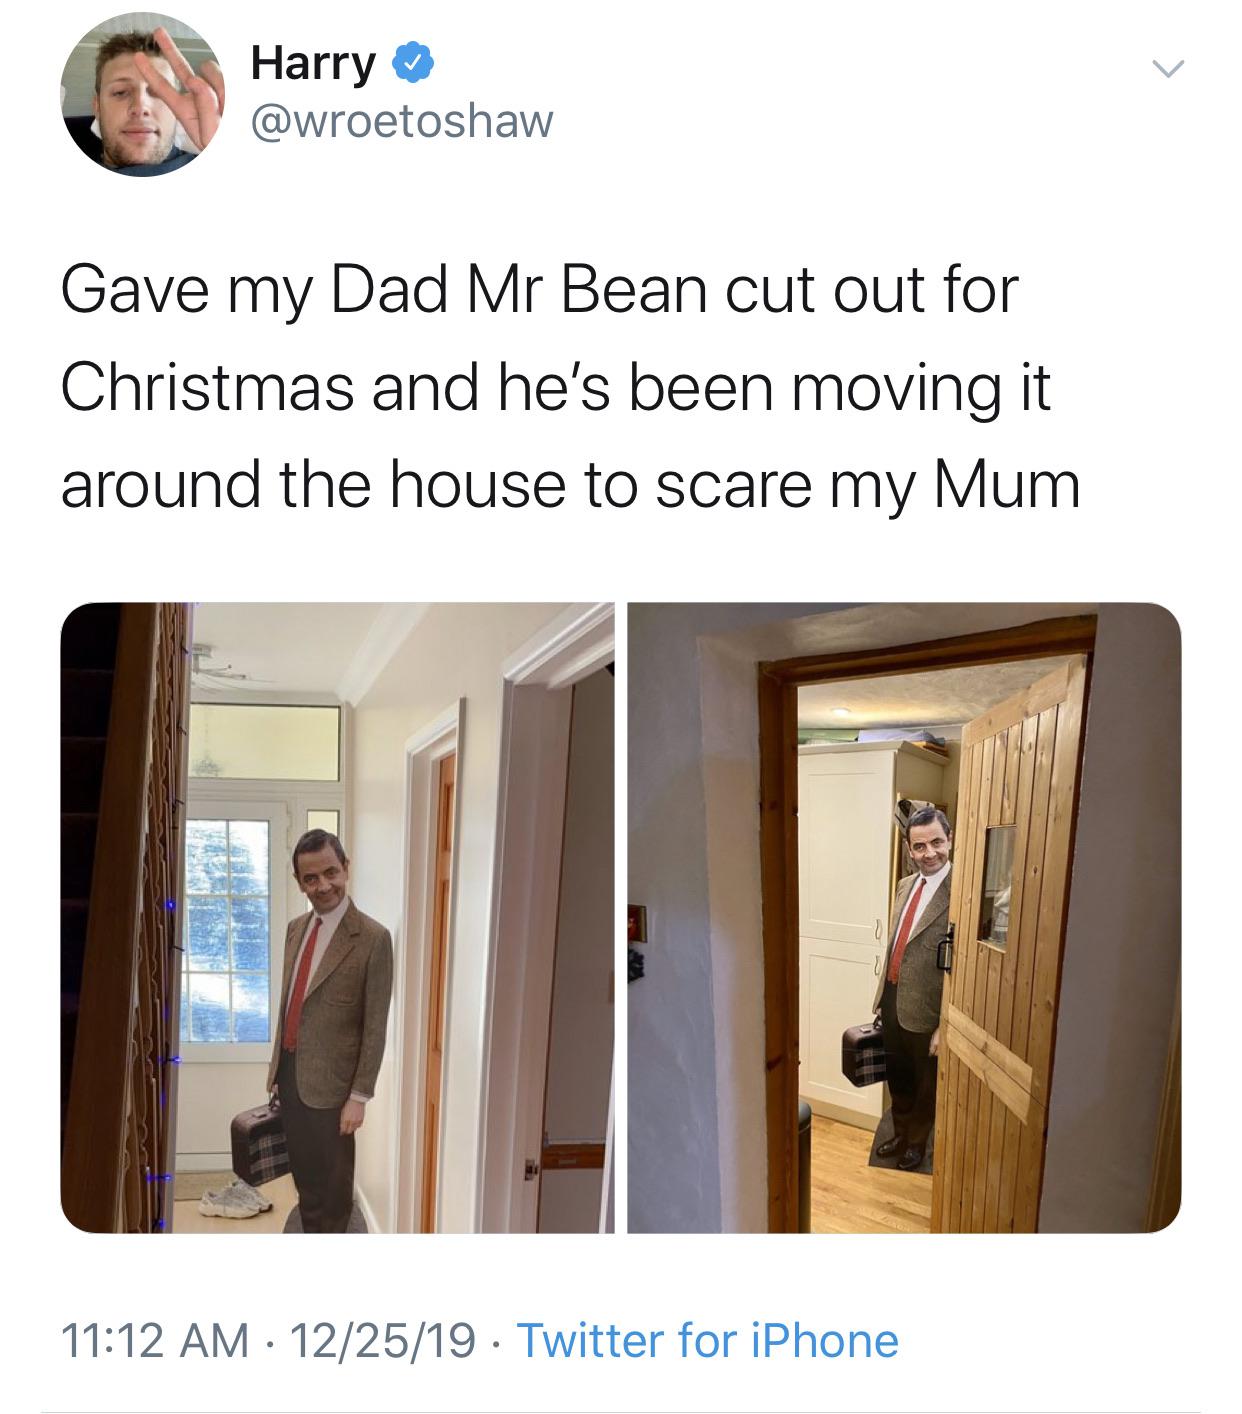 presentation - Harry Gave my Dad Mr Bean cut out for Christmas and he's been moving it around the house to scare my Mum 122519 . Twitter for iPhone